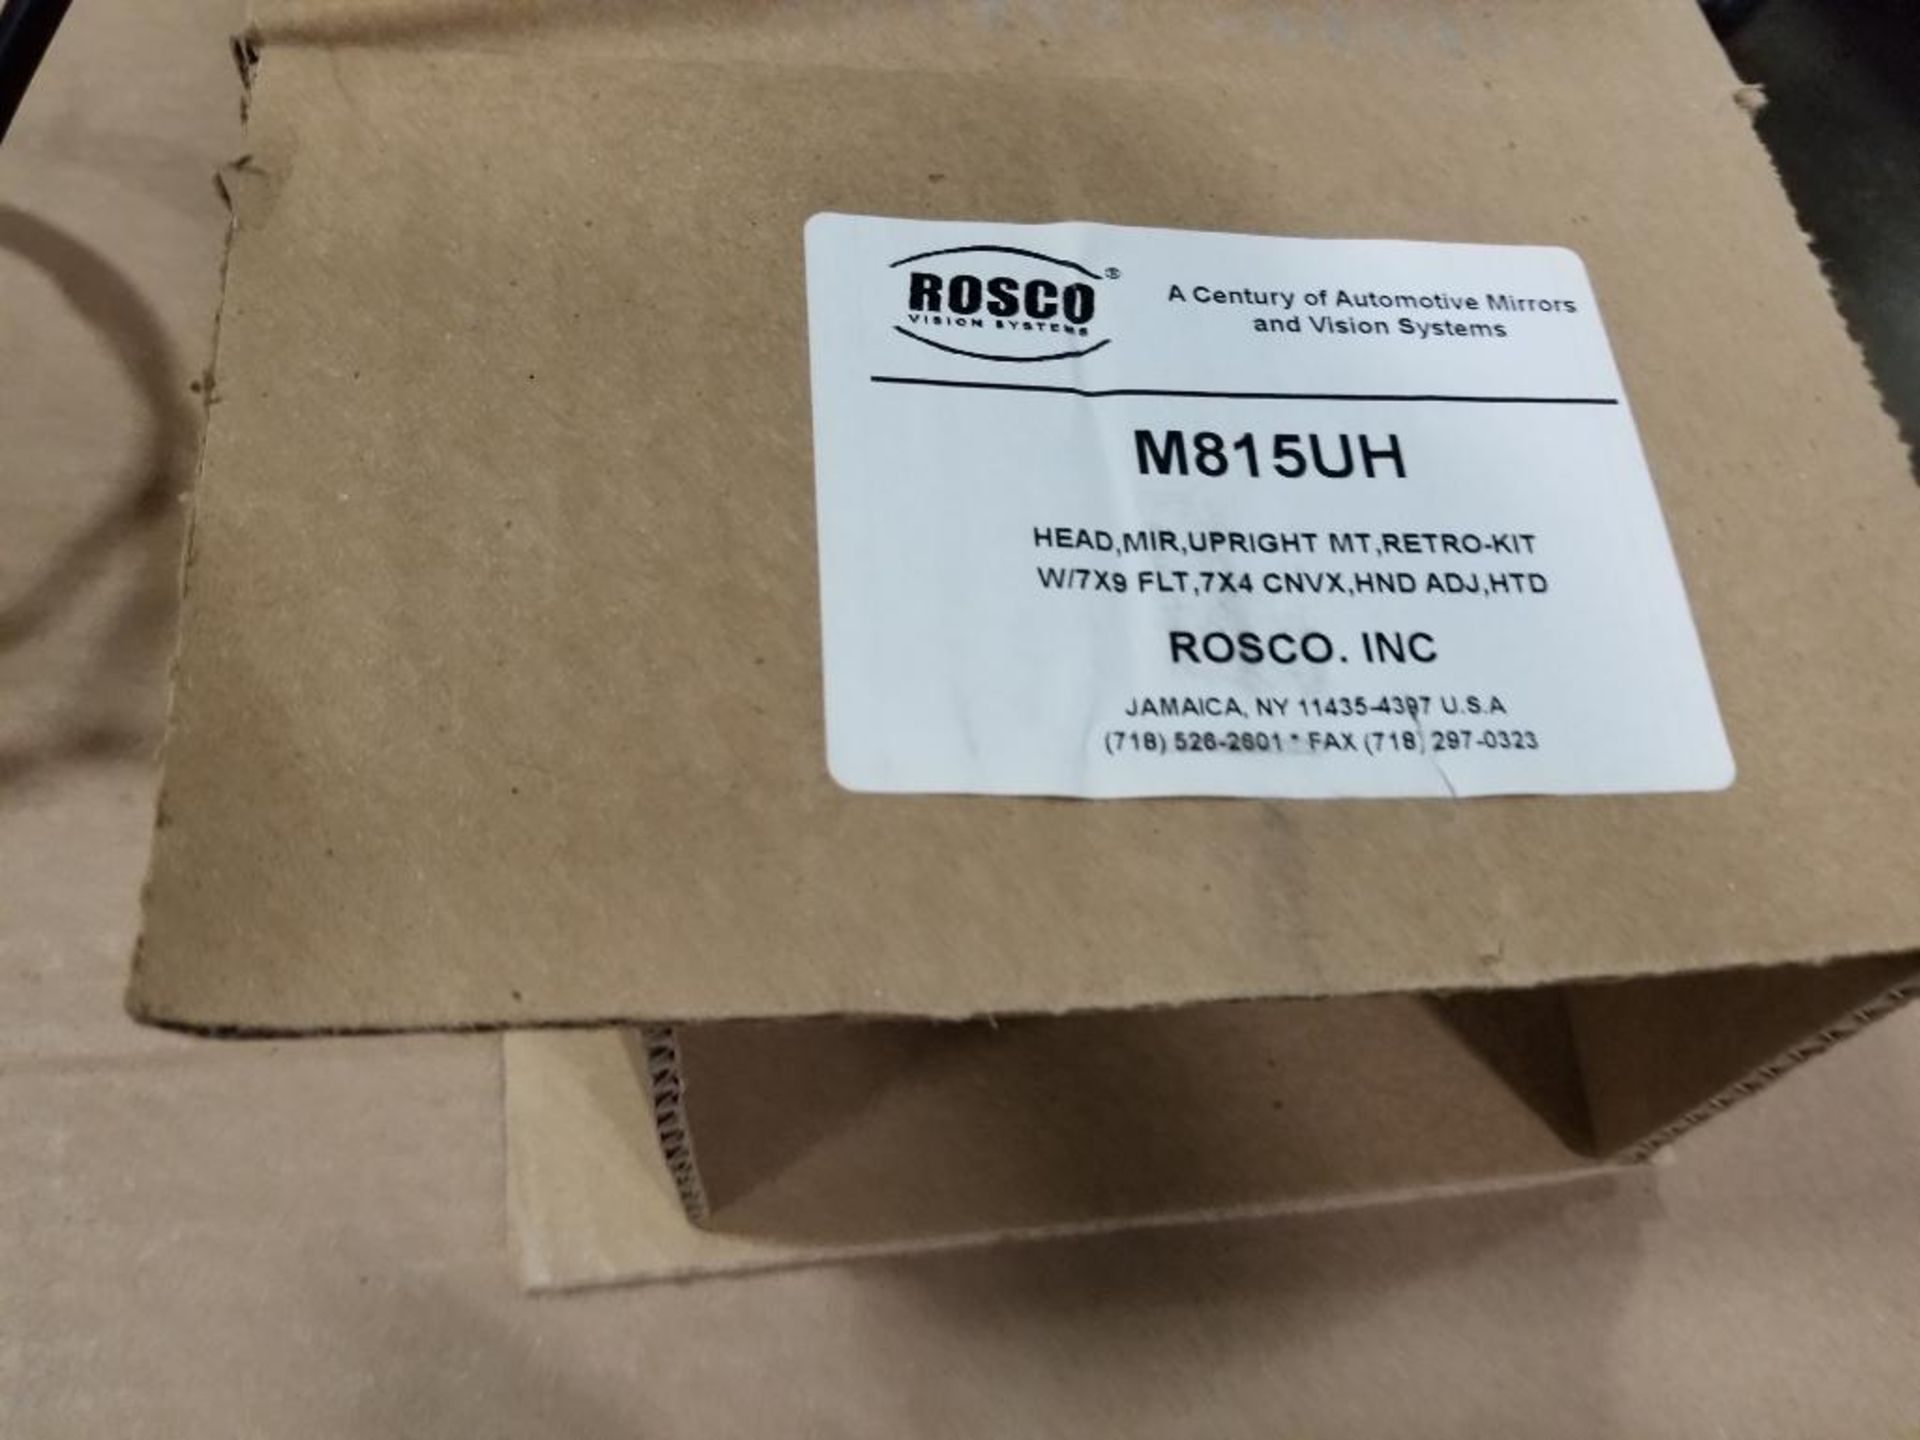 Qty 2 - ROSCO M815UH adjustable mirror Kit. New in box. - Image 3 of 5